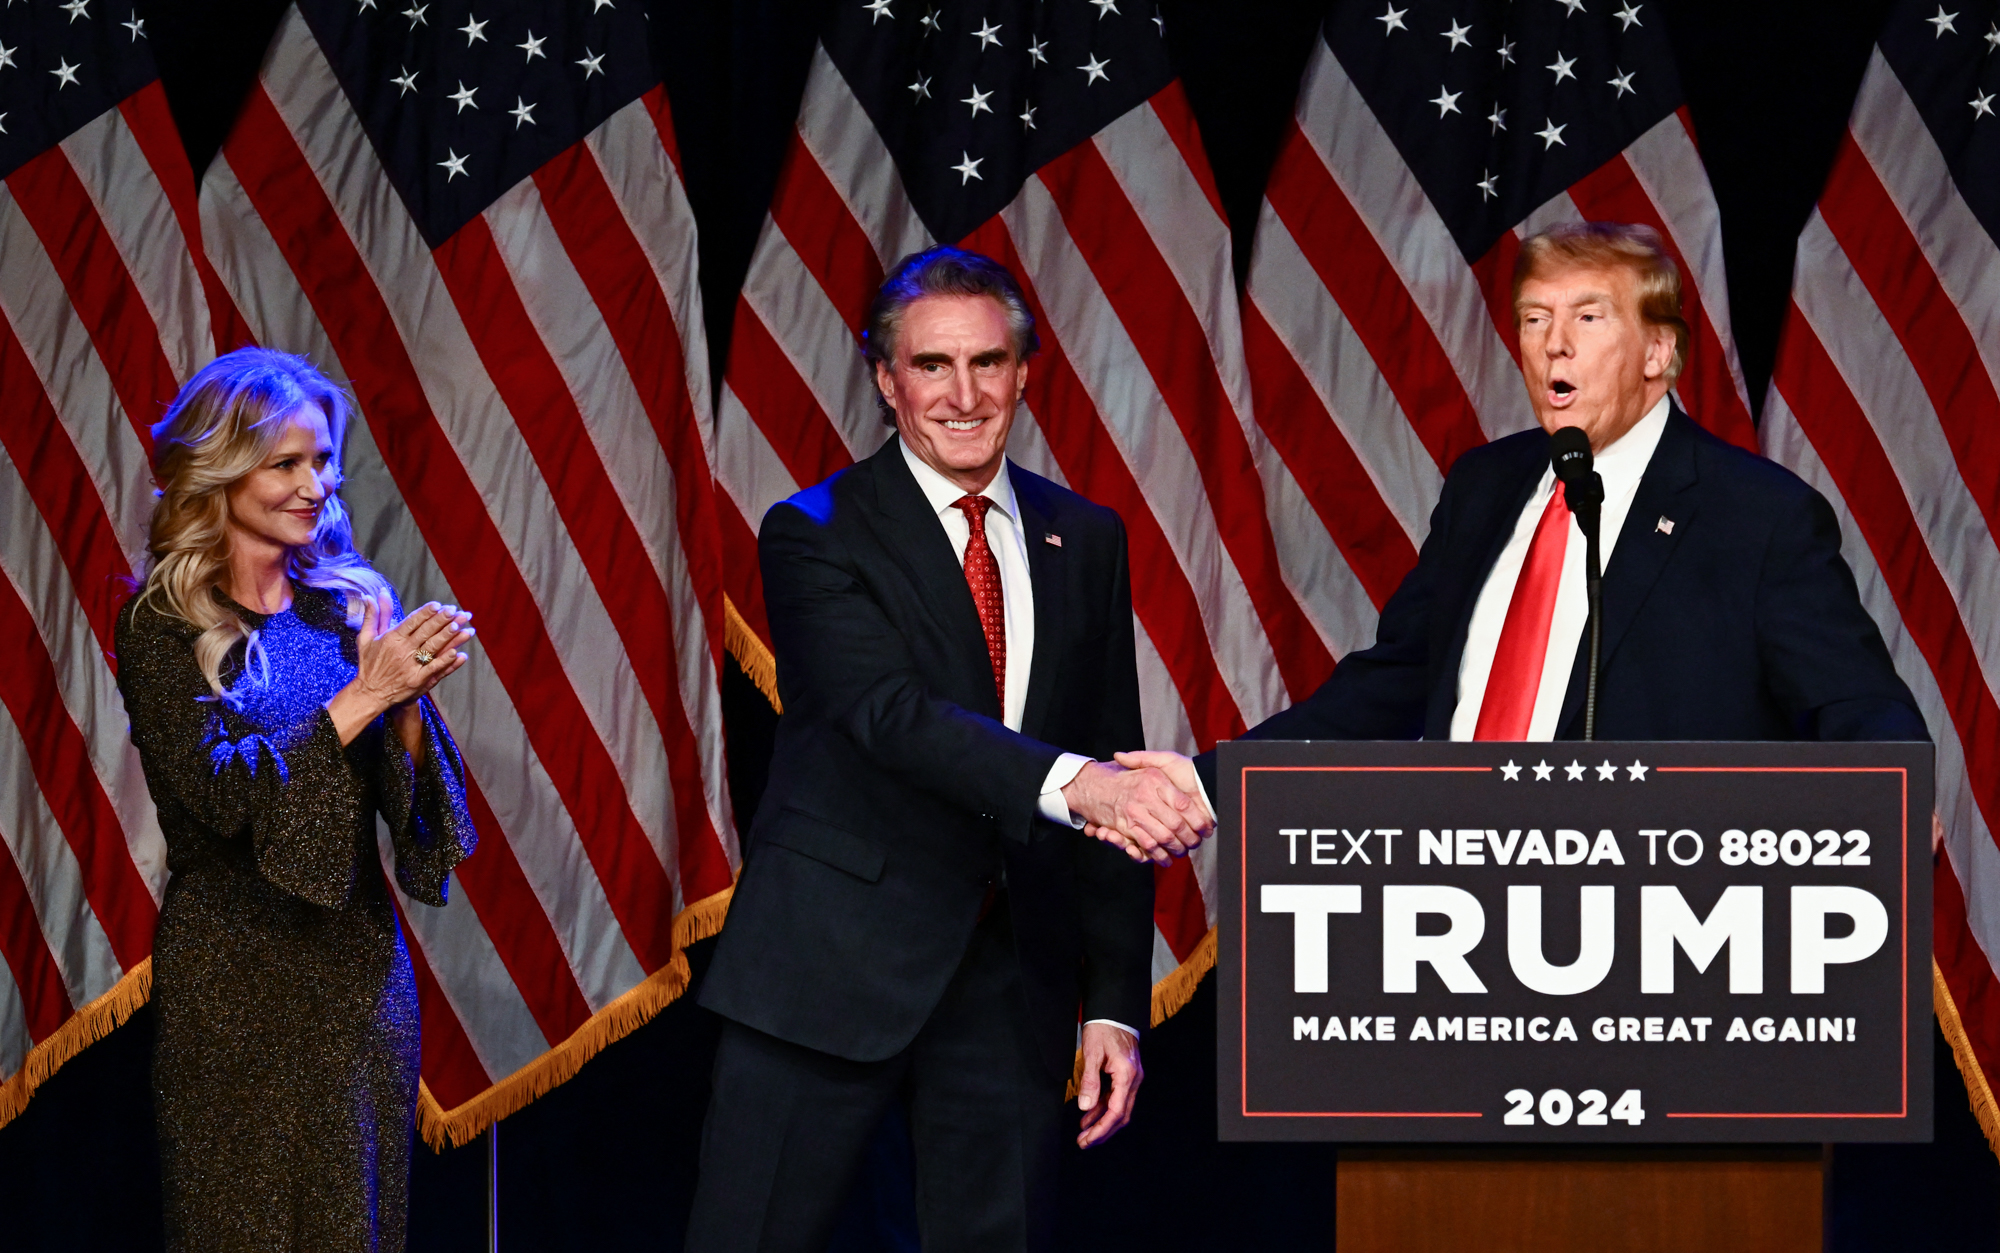 Doug Burgum shakes hands with Donald Trump, as his wife, Kathryn Burgum, applauds, during a Caucus Night watch party.